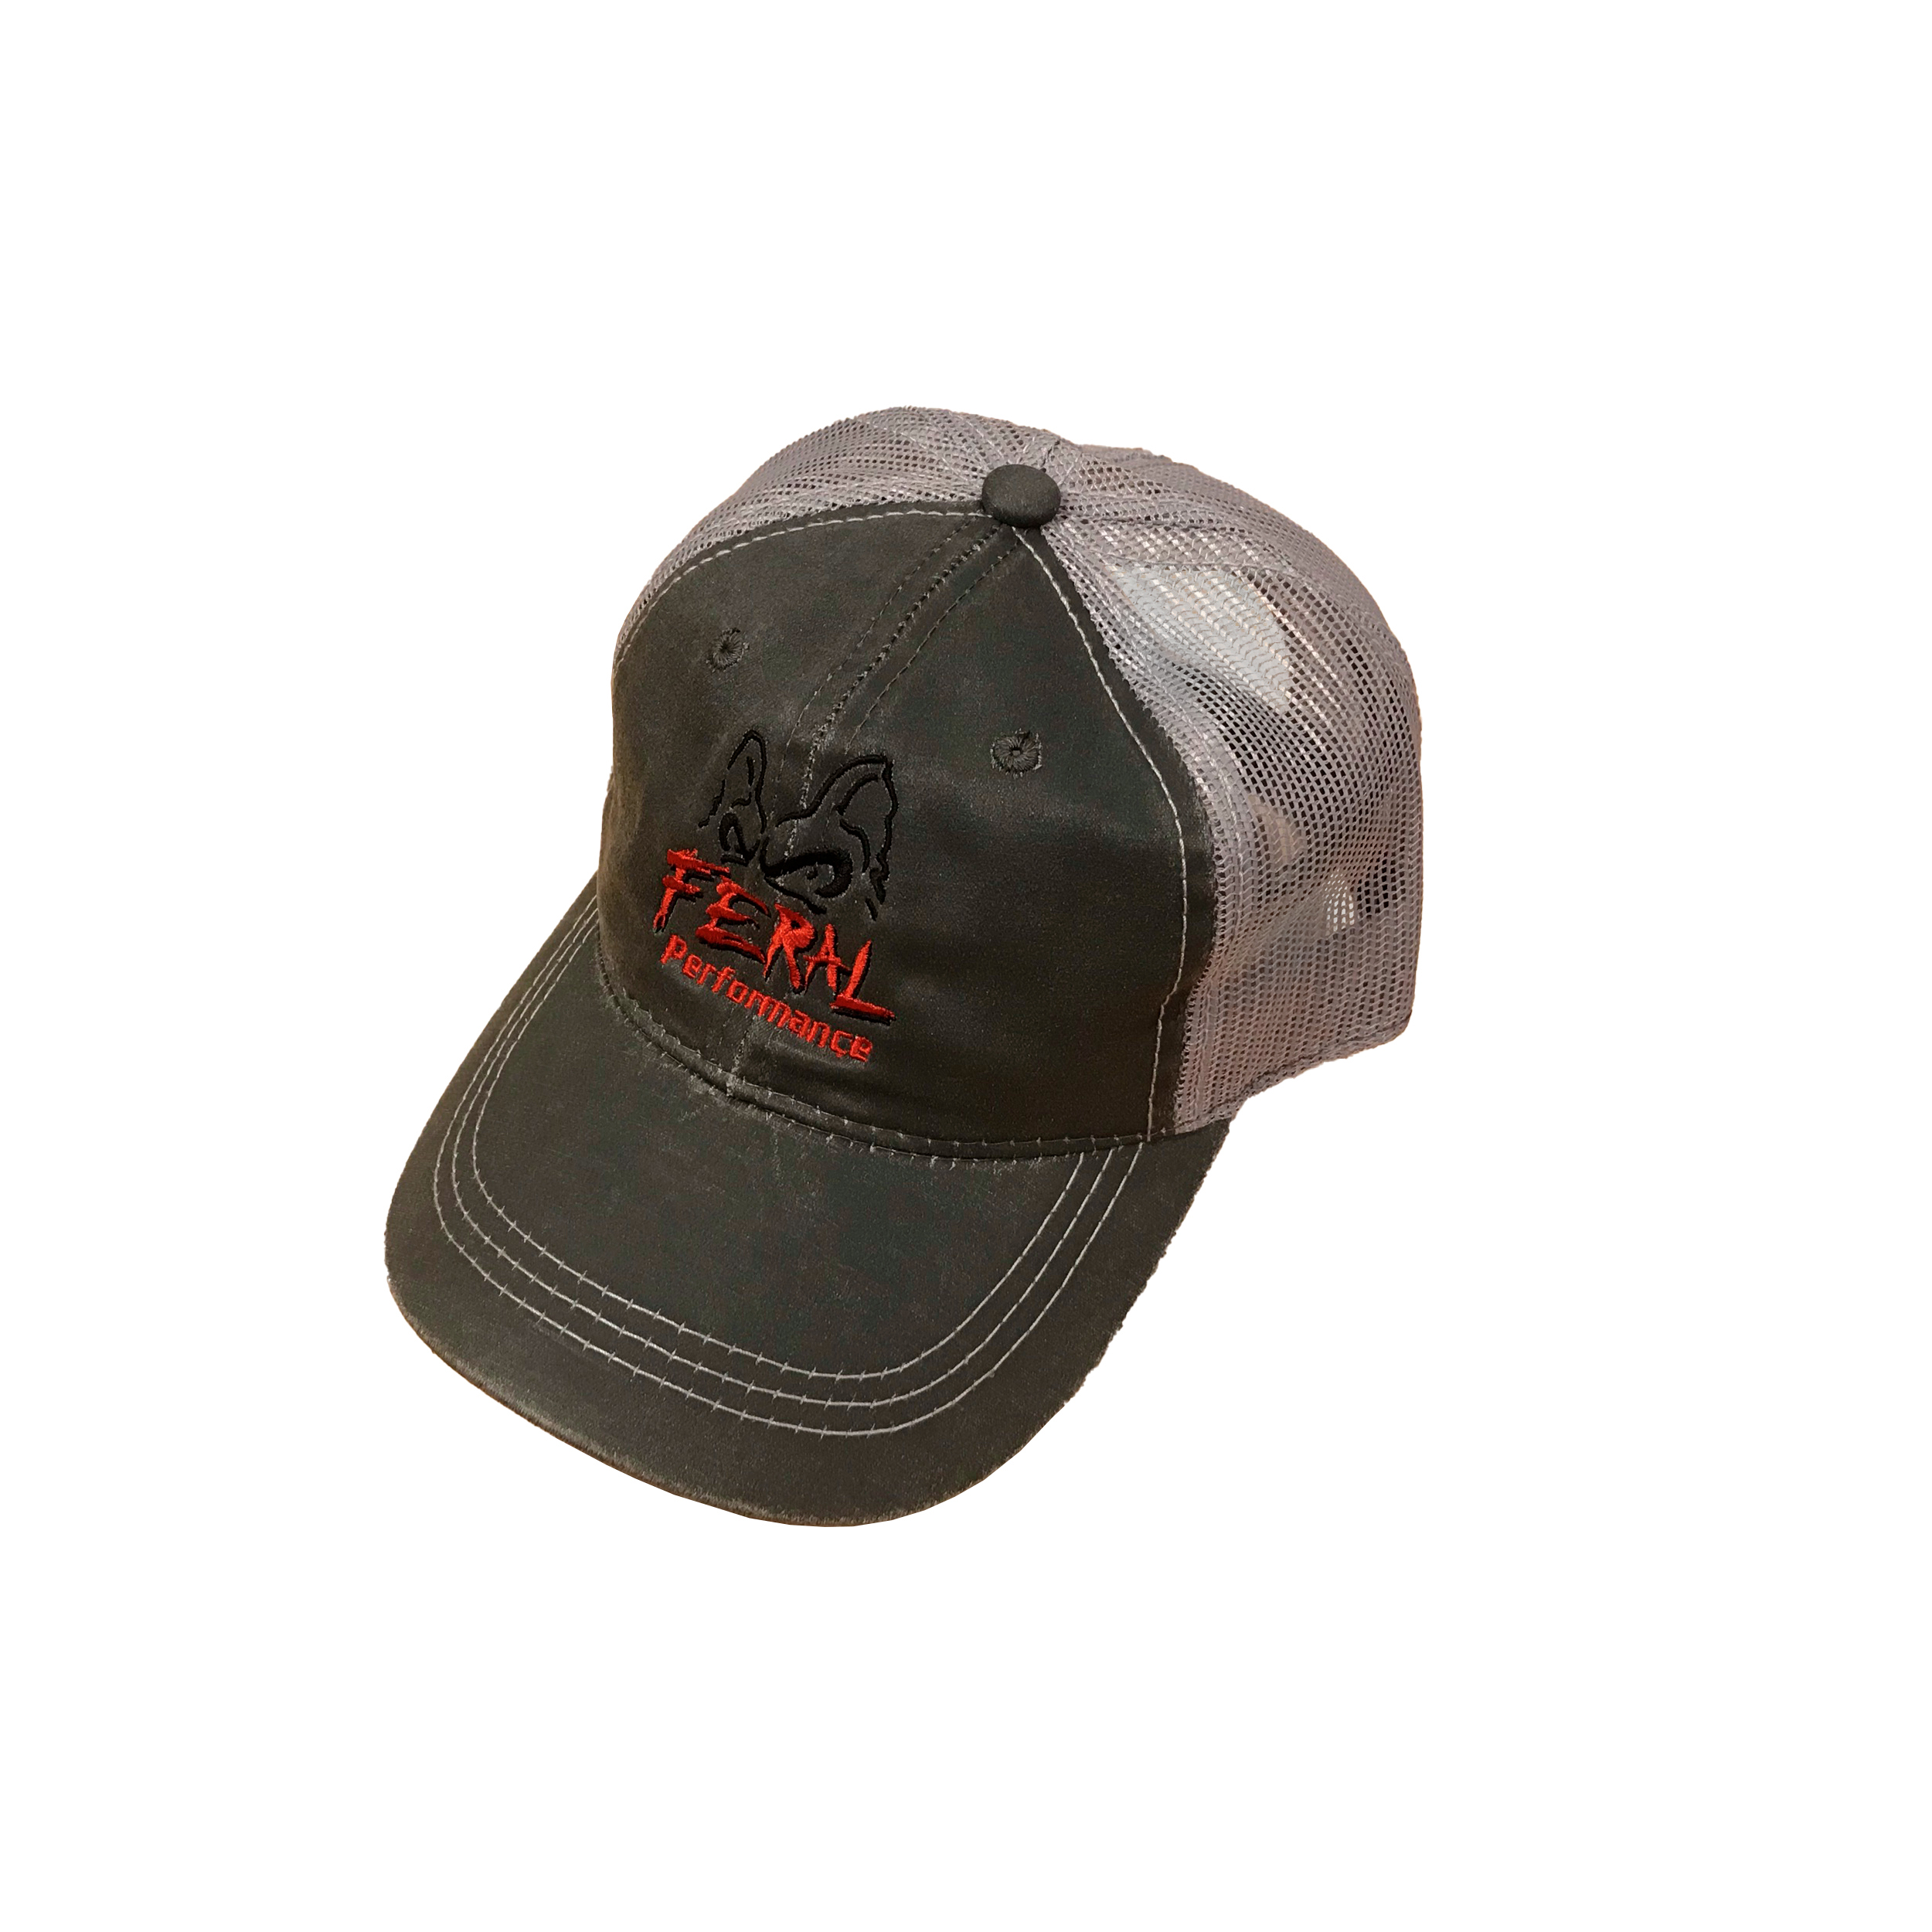 FERAL Performance Weathered Mesh Ball Cap - Charcoal